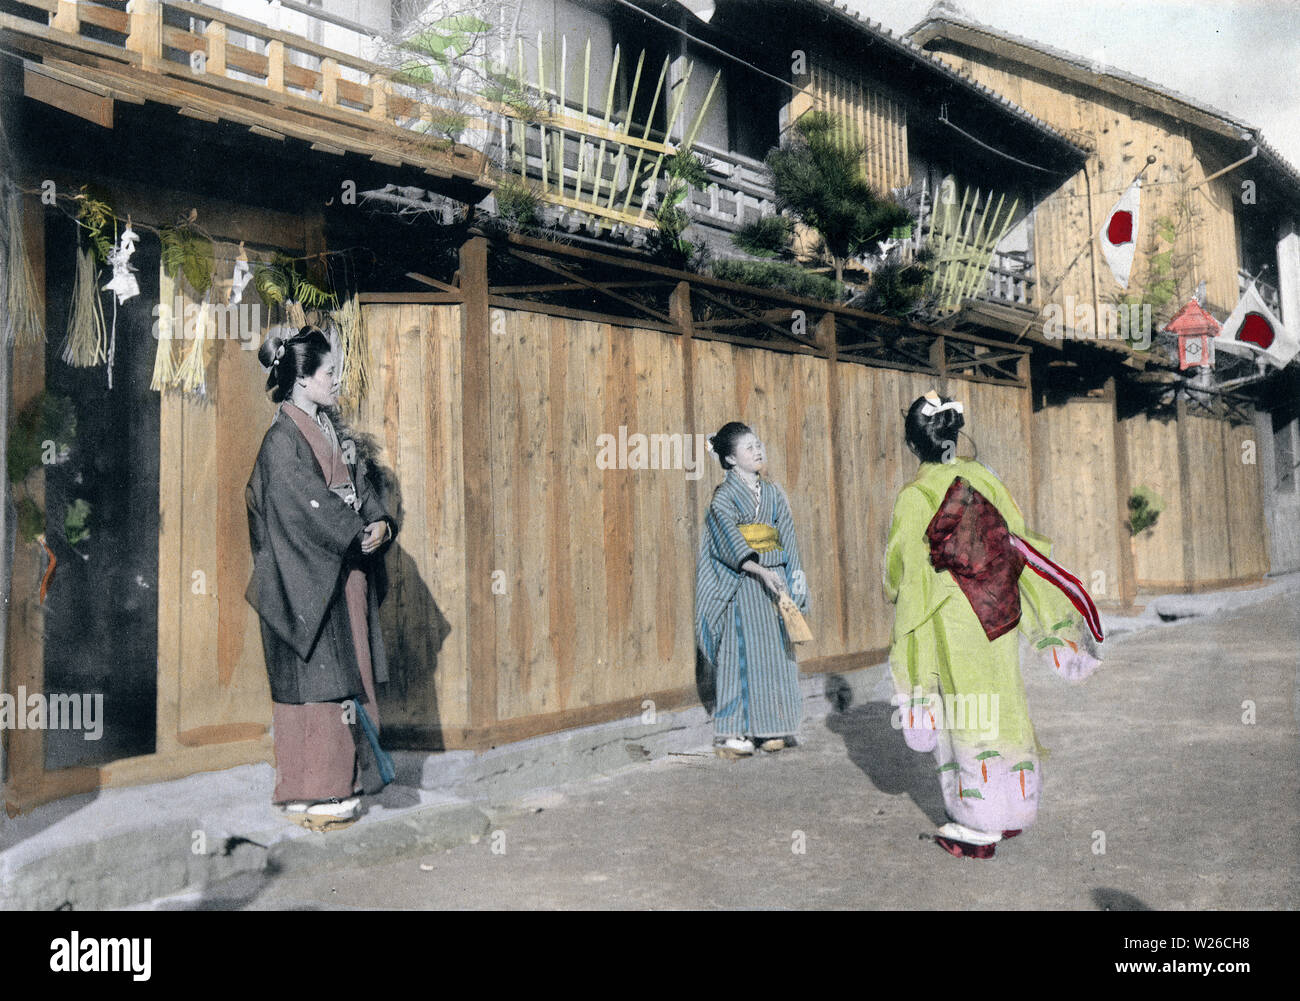 [ 1900s Japan - Japanese New Year - Playing Hanetsuki ] —   Girls play hanetsuki (battledore and shuttlecock) in front of their home, one of the traditional games played during the New Year celebrations.  This image is part of The New Year in Japan, a book published by Kobe-based photographer Kozaburo Tamamura in 1906 (Meiji 39).  20th century vintage collotype print. Stock Photo